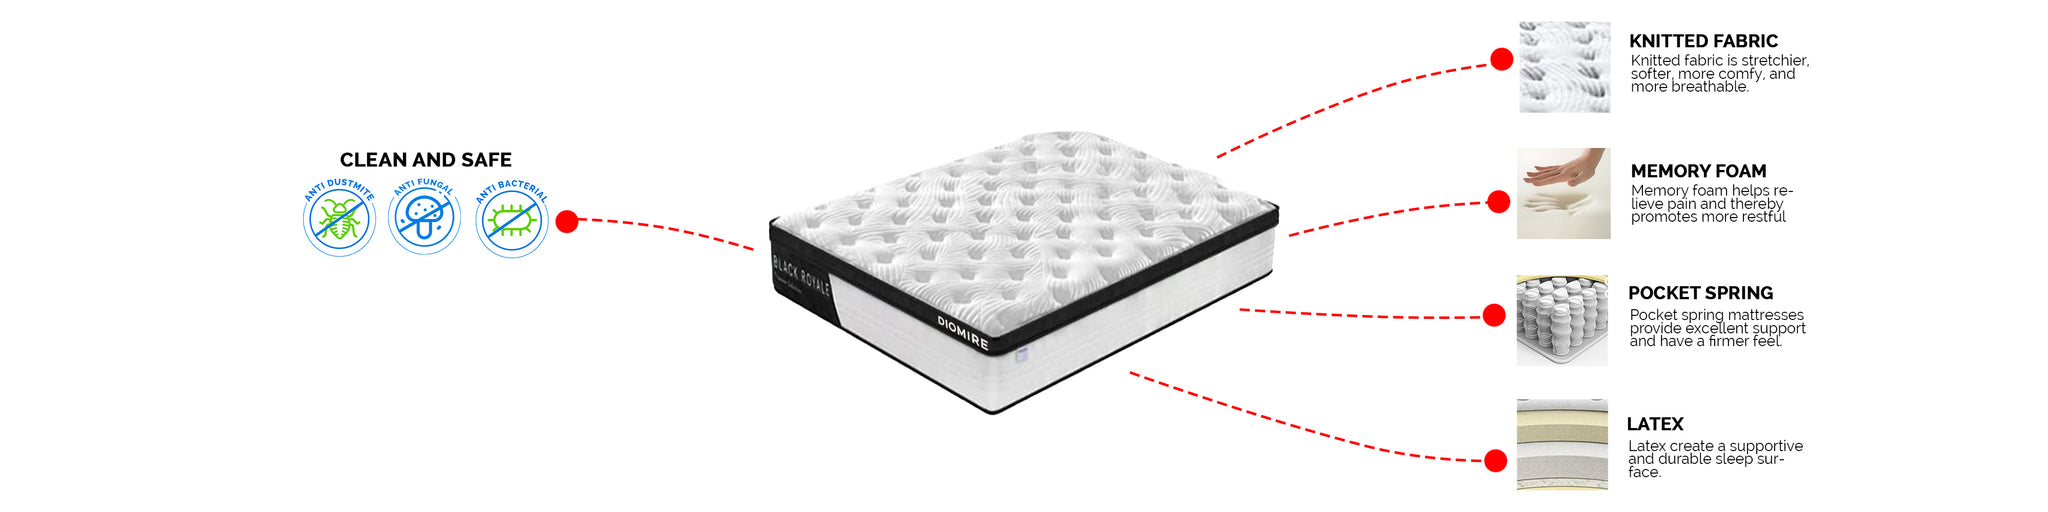 Diomire Black Royale Pocket Spring Mattress - 13.5" Mattress In Single, Super Single, Queen and King Size